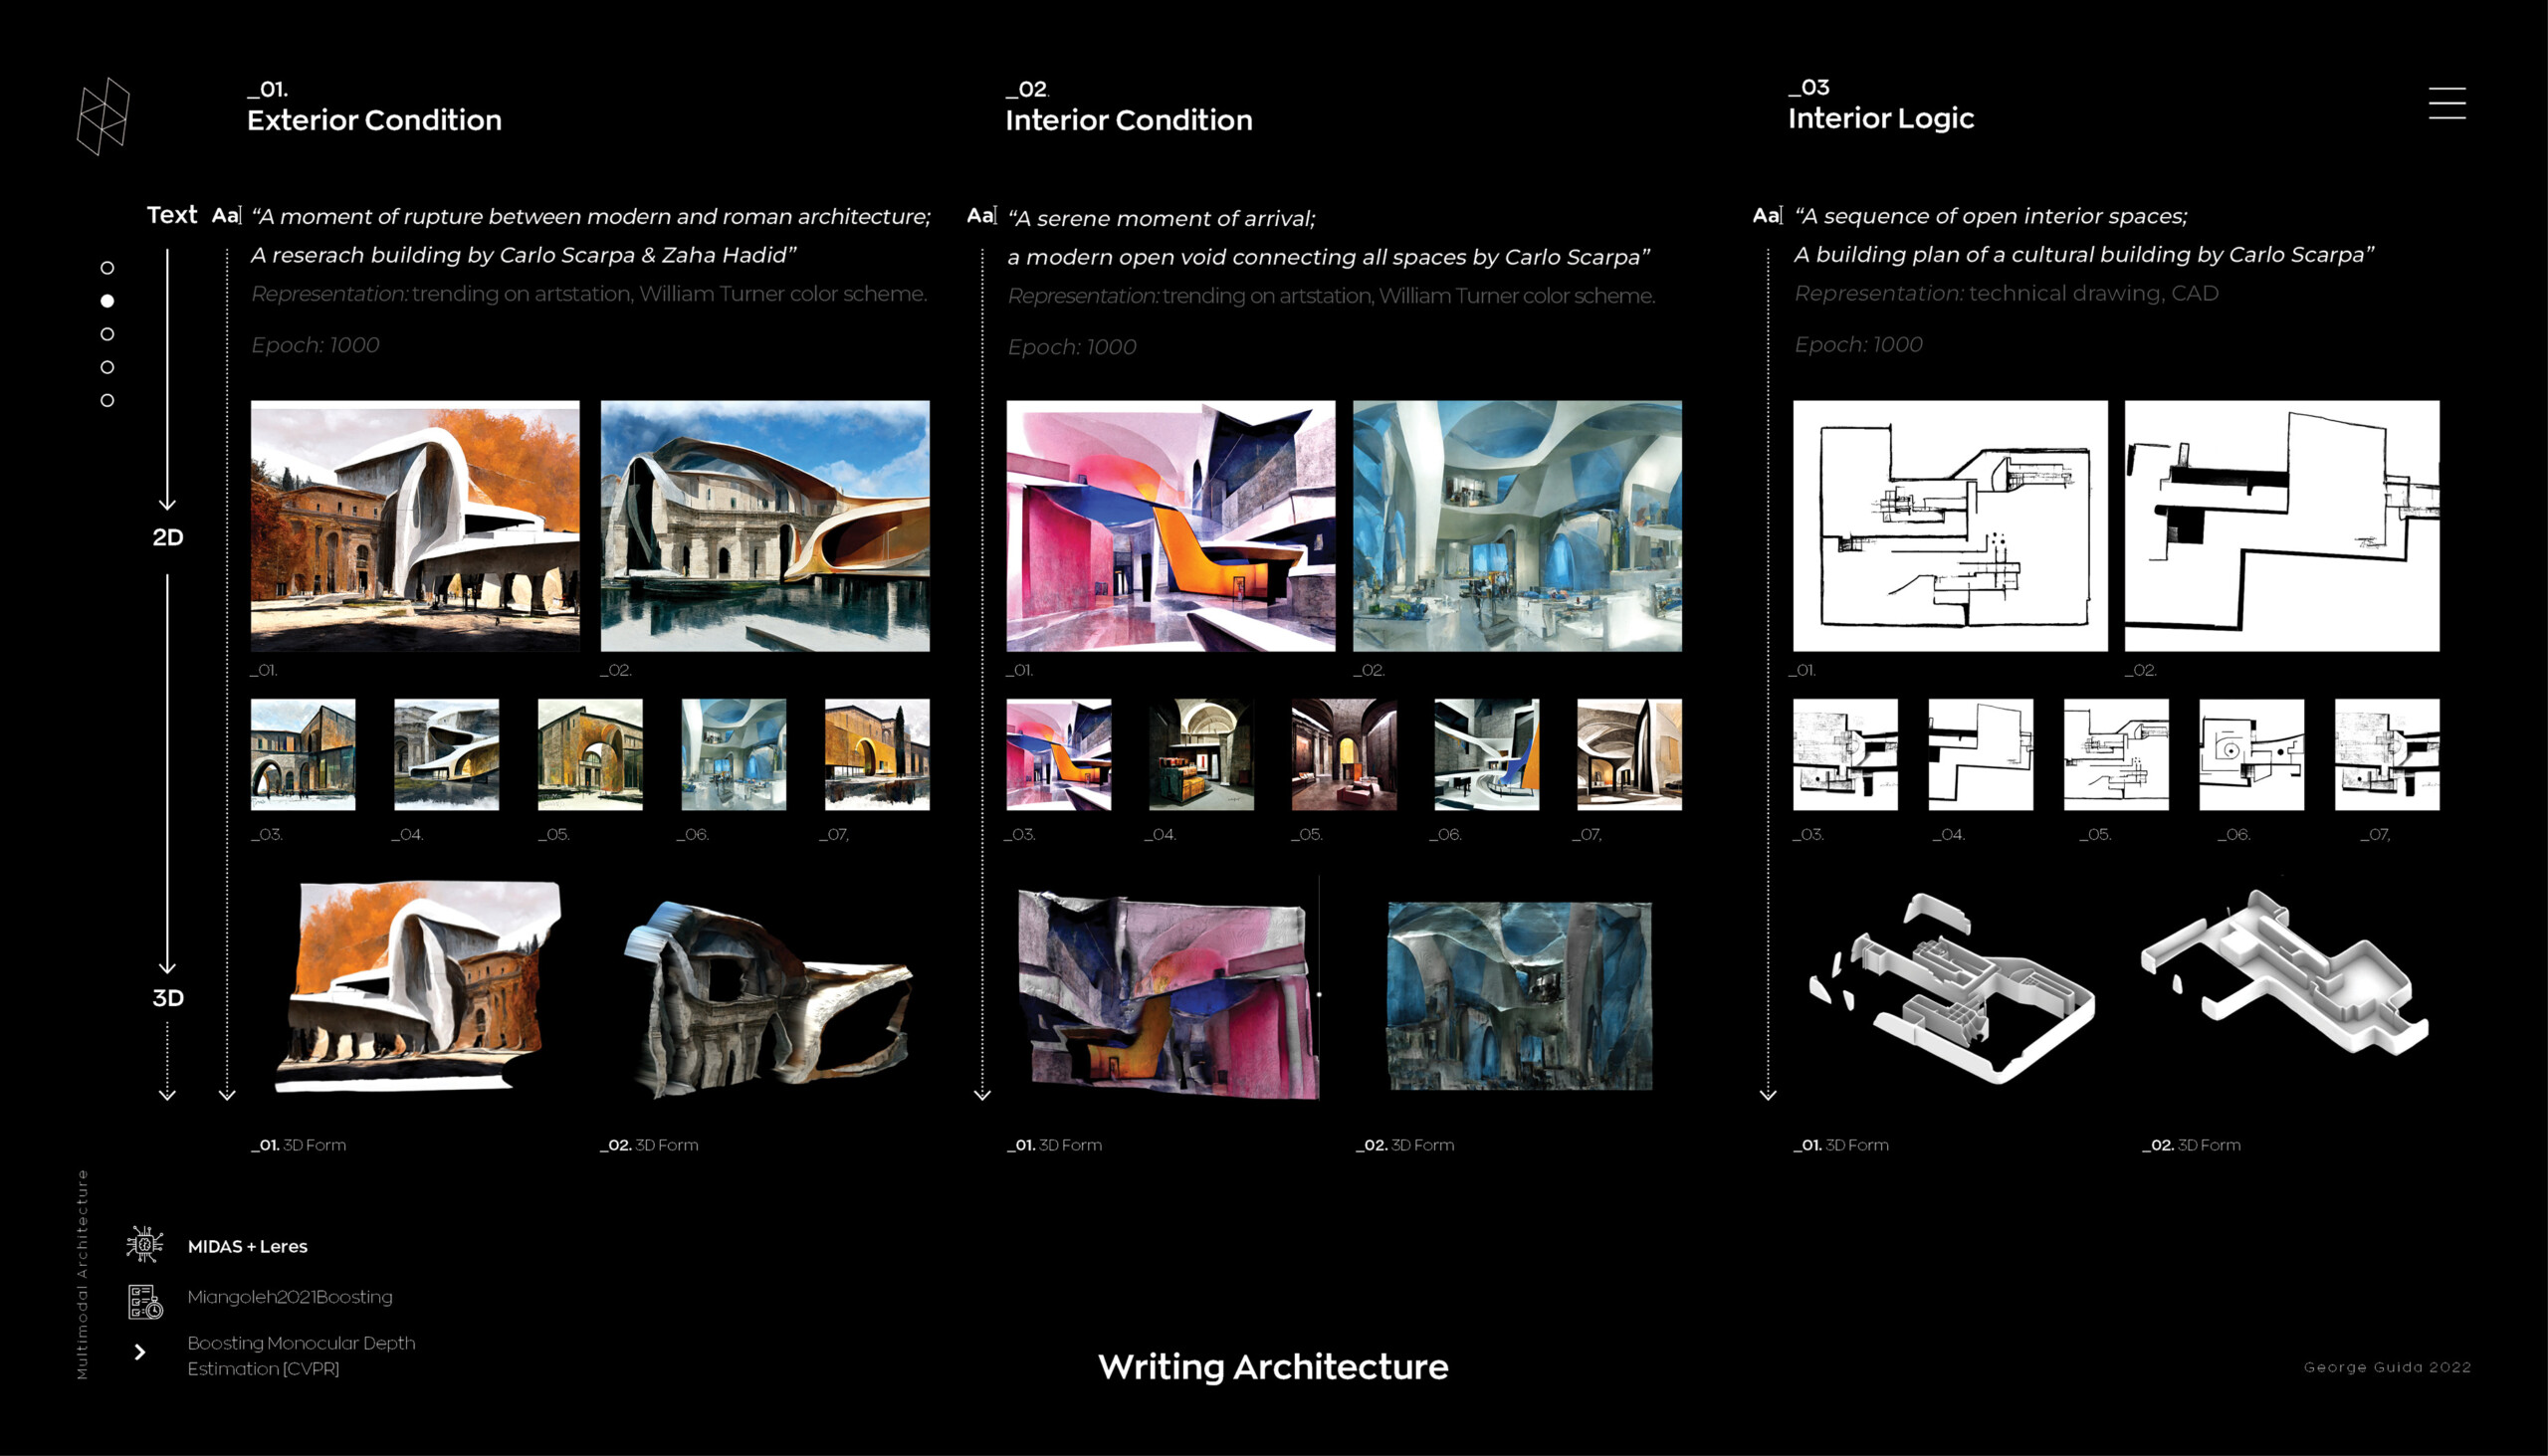 Collage of architectural drawings and drawings.